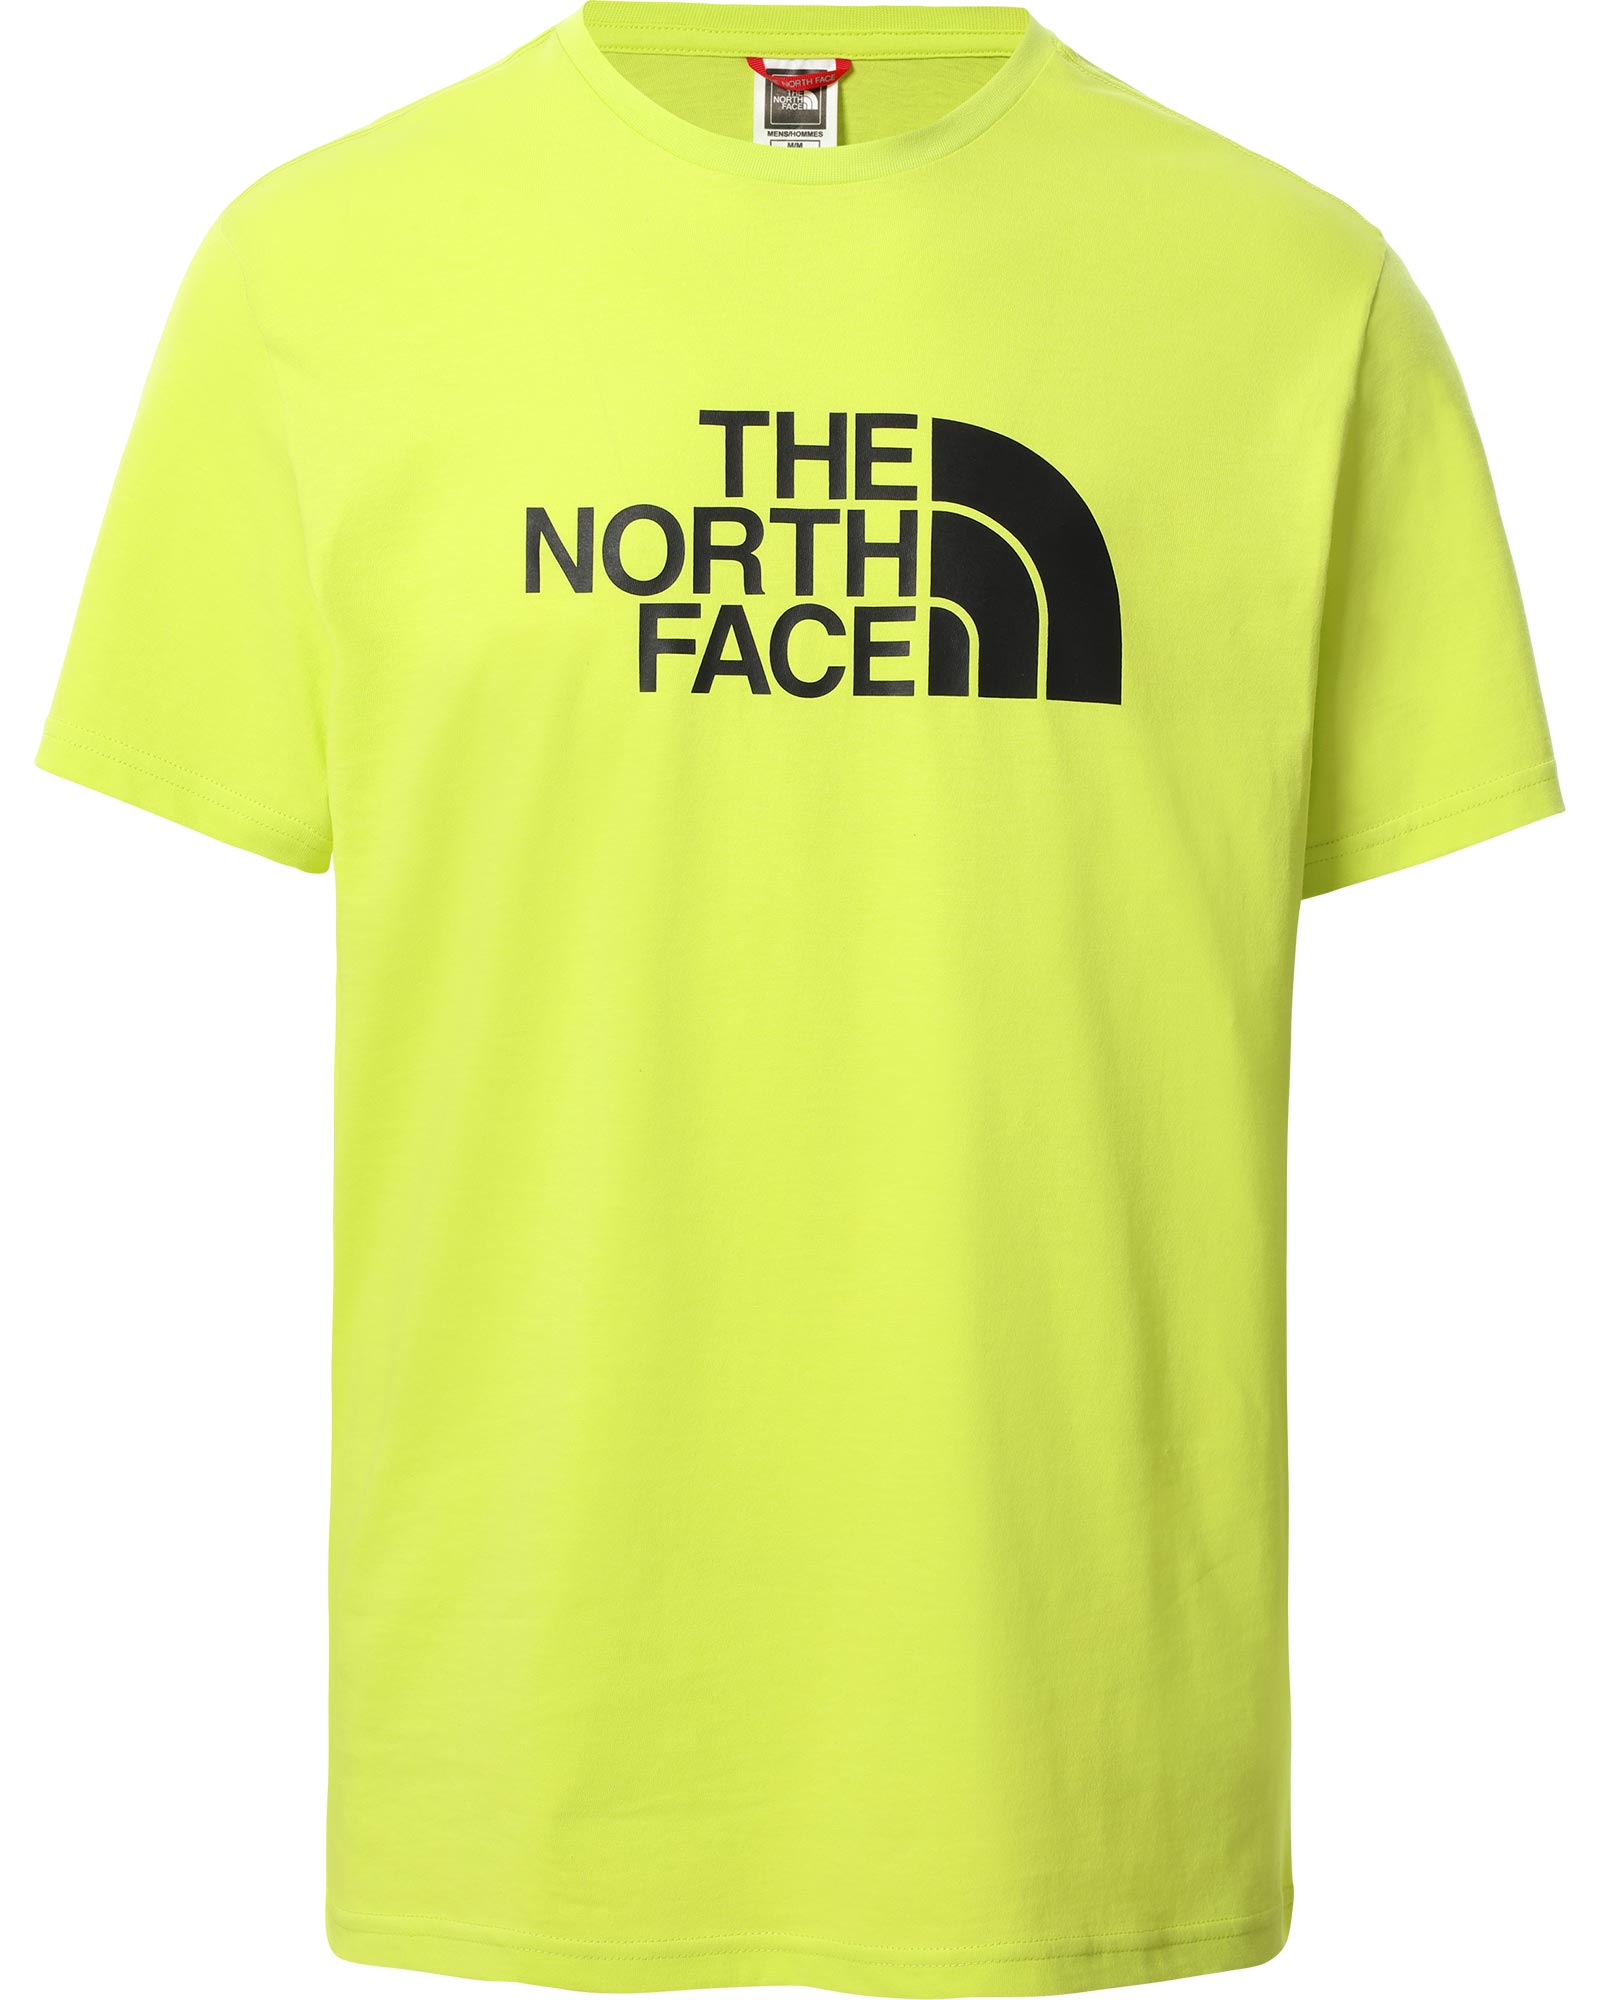 The North Face Easy Men’s T Shirt - Sulphur Spring Green XS